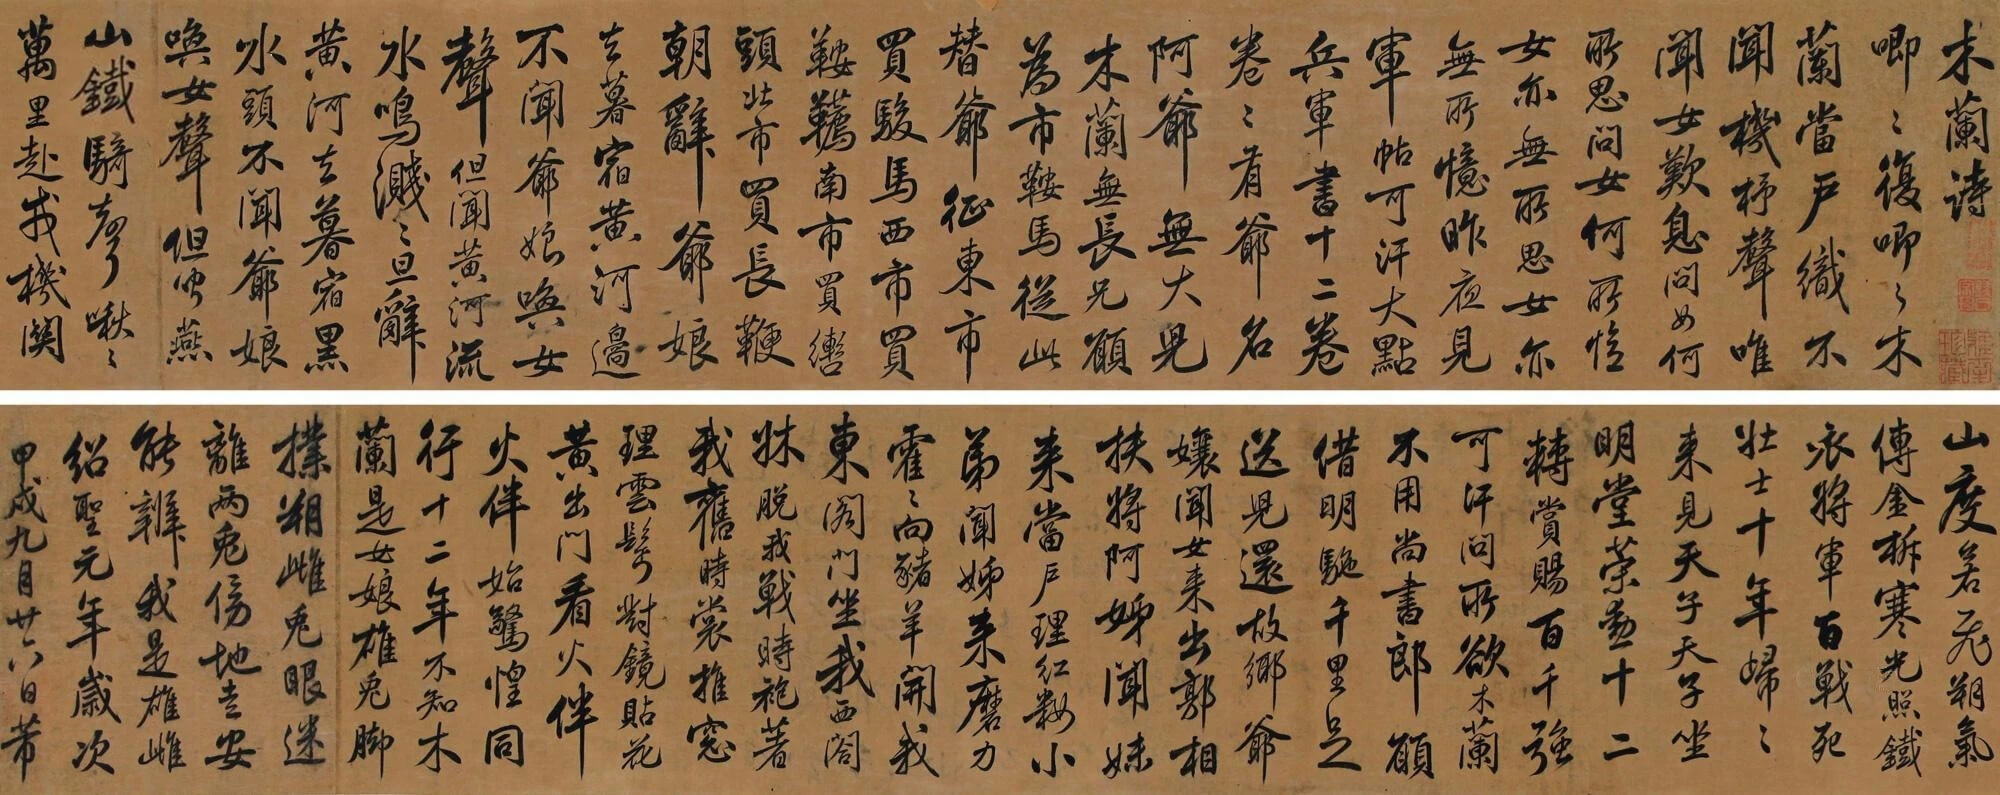 This copy of The Ballad of Mulan was written by Song dynasty calligrapher Mi Fu in 1094 AD (Public domain).